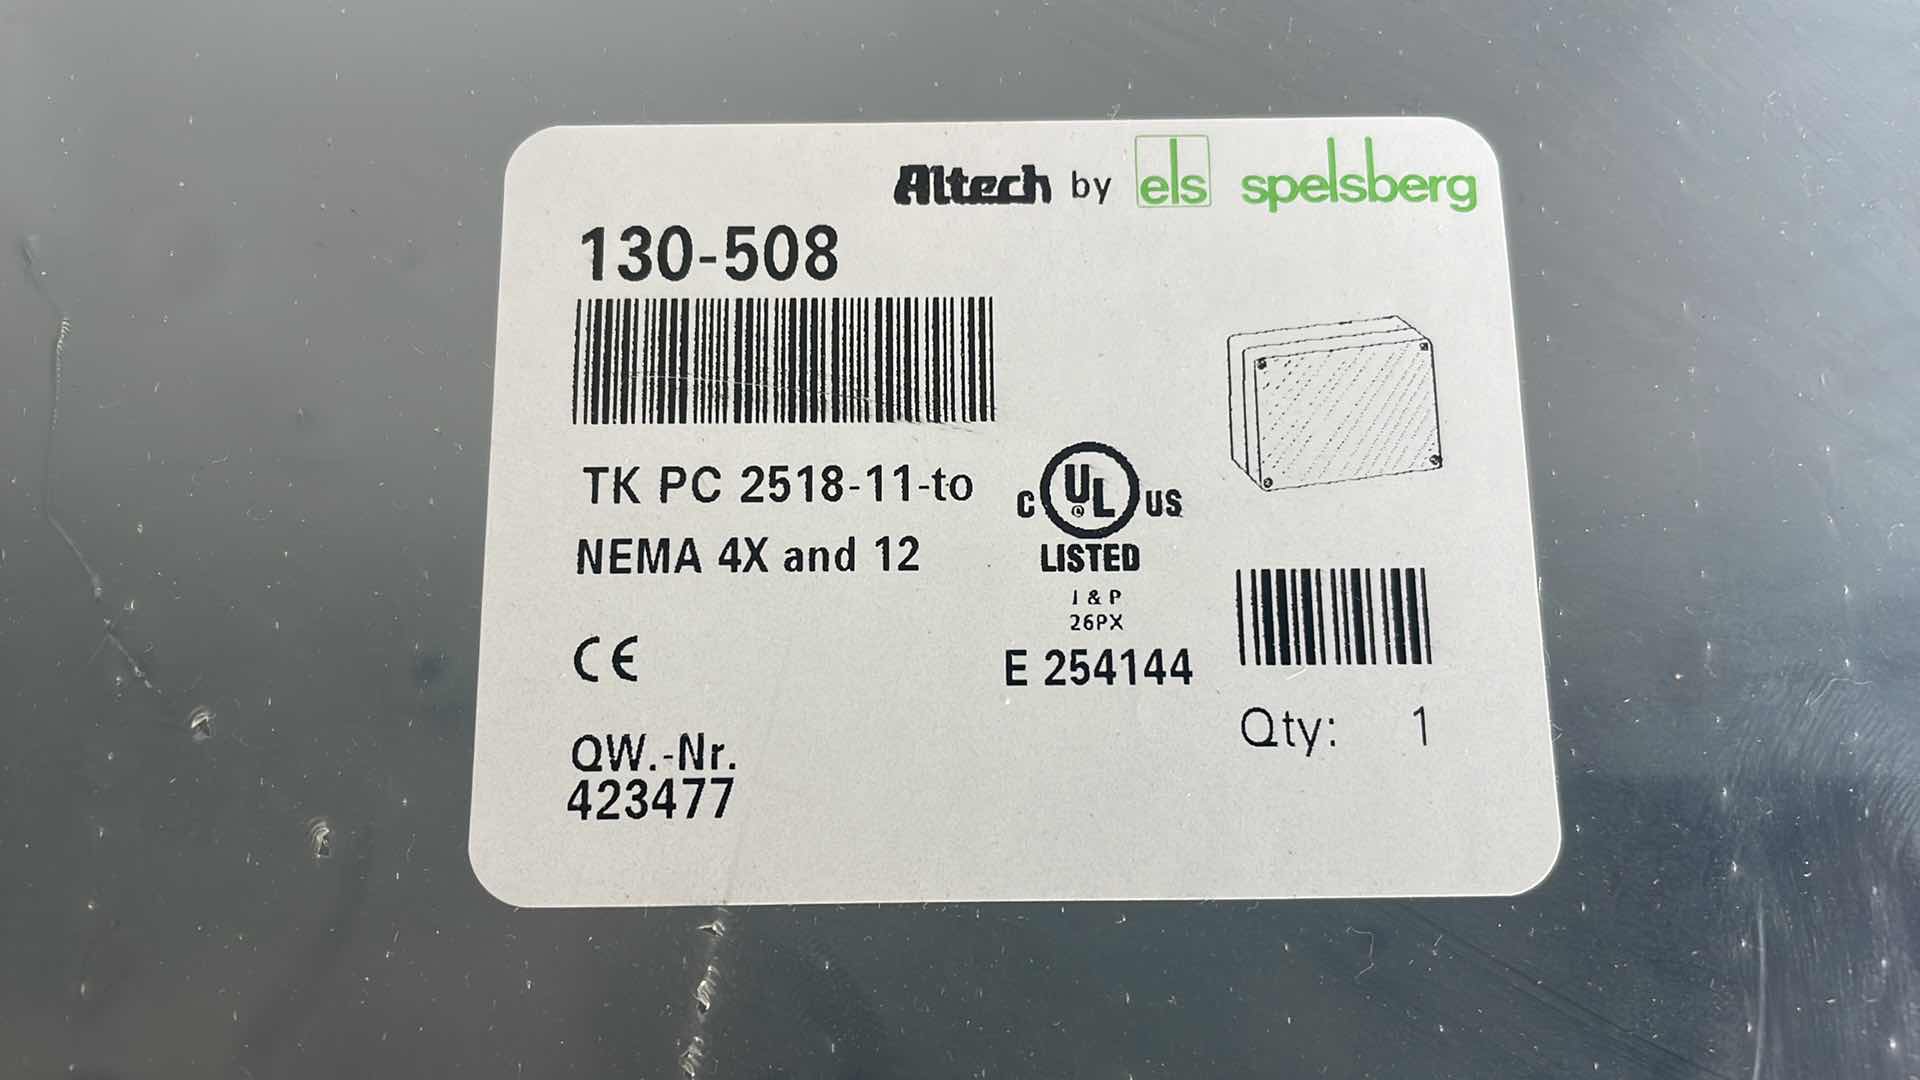 Photo 2 of NEW SEALED ALTECH BY ELS SPELSBERG INDUSTRIAL AUTOMATION ENCLOSURE 130-508 TK PC 2518-11 TO NEMA4X AND 12